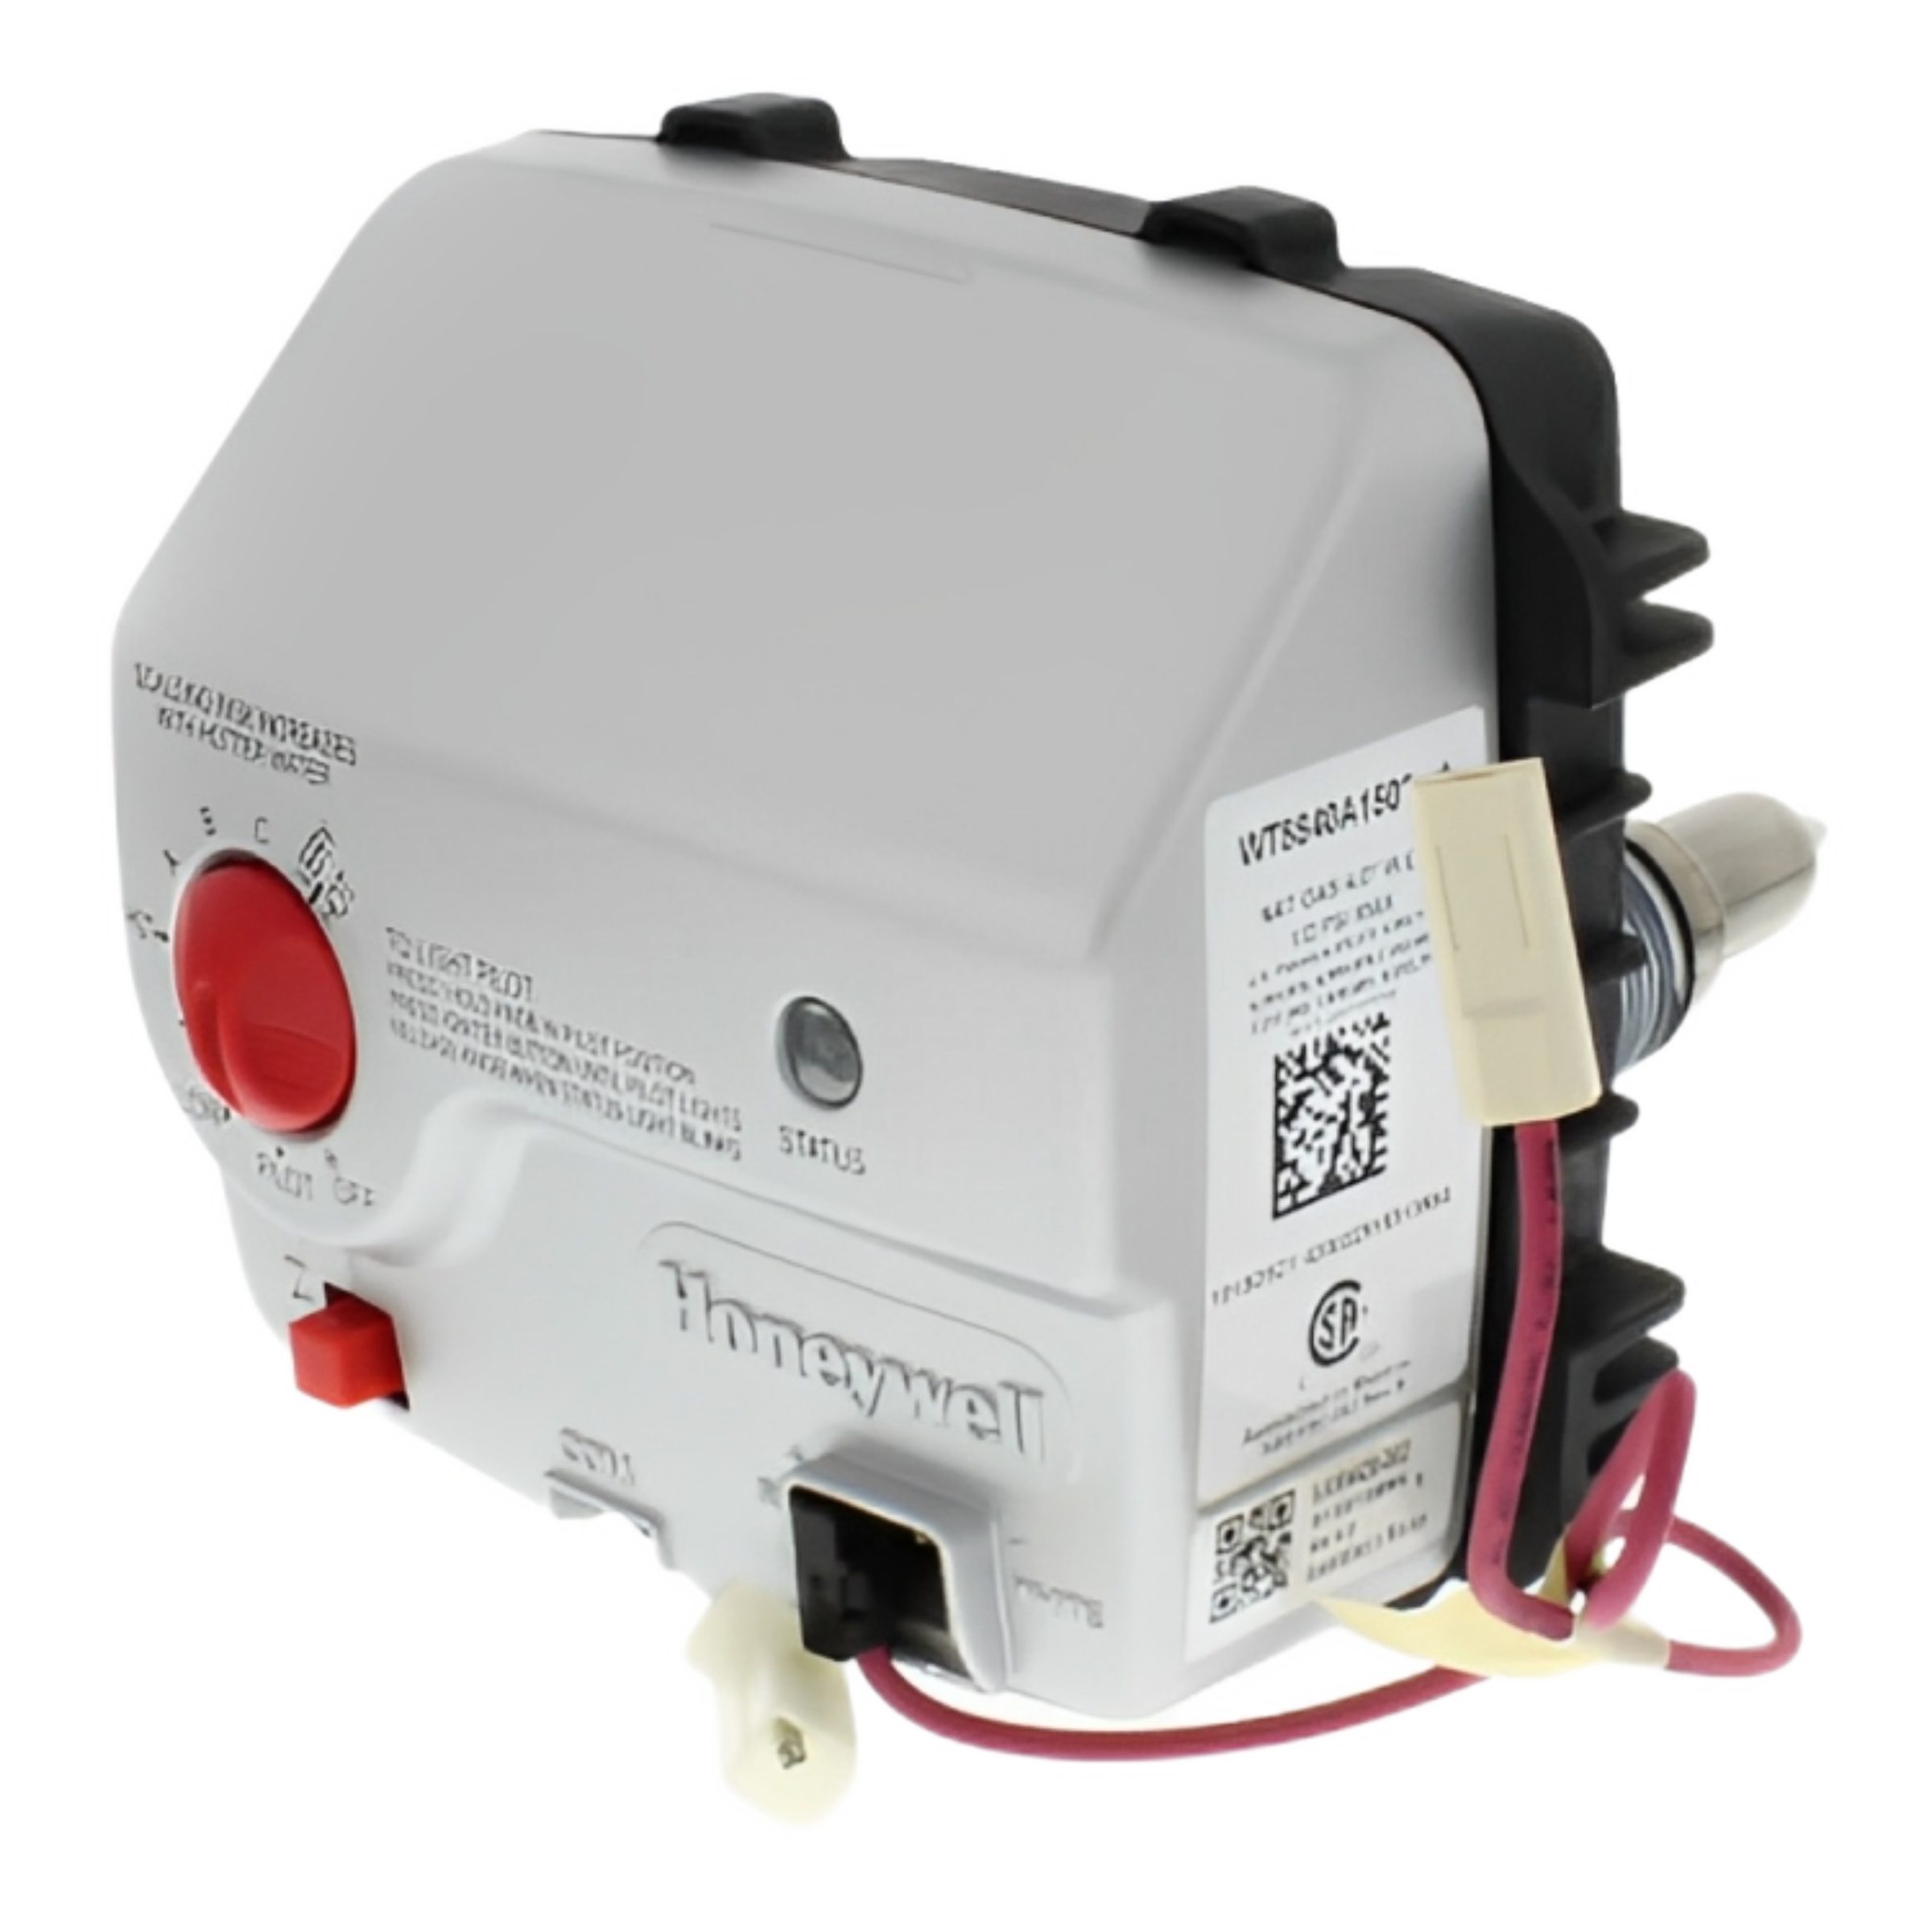 Wt8840a1500 Honeywell Home Trade Replacement Gas Valve For Bradford Wh